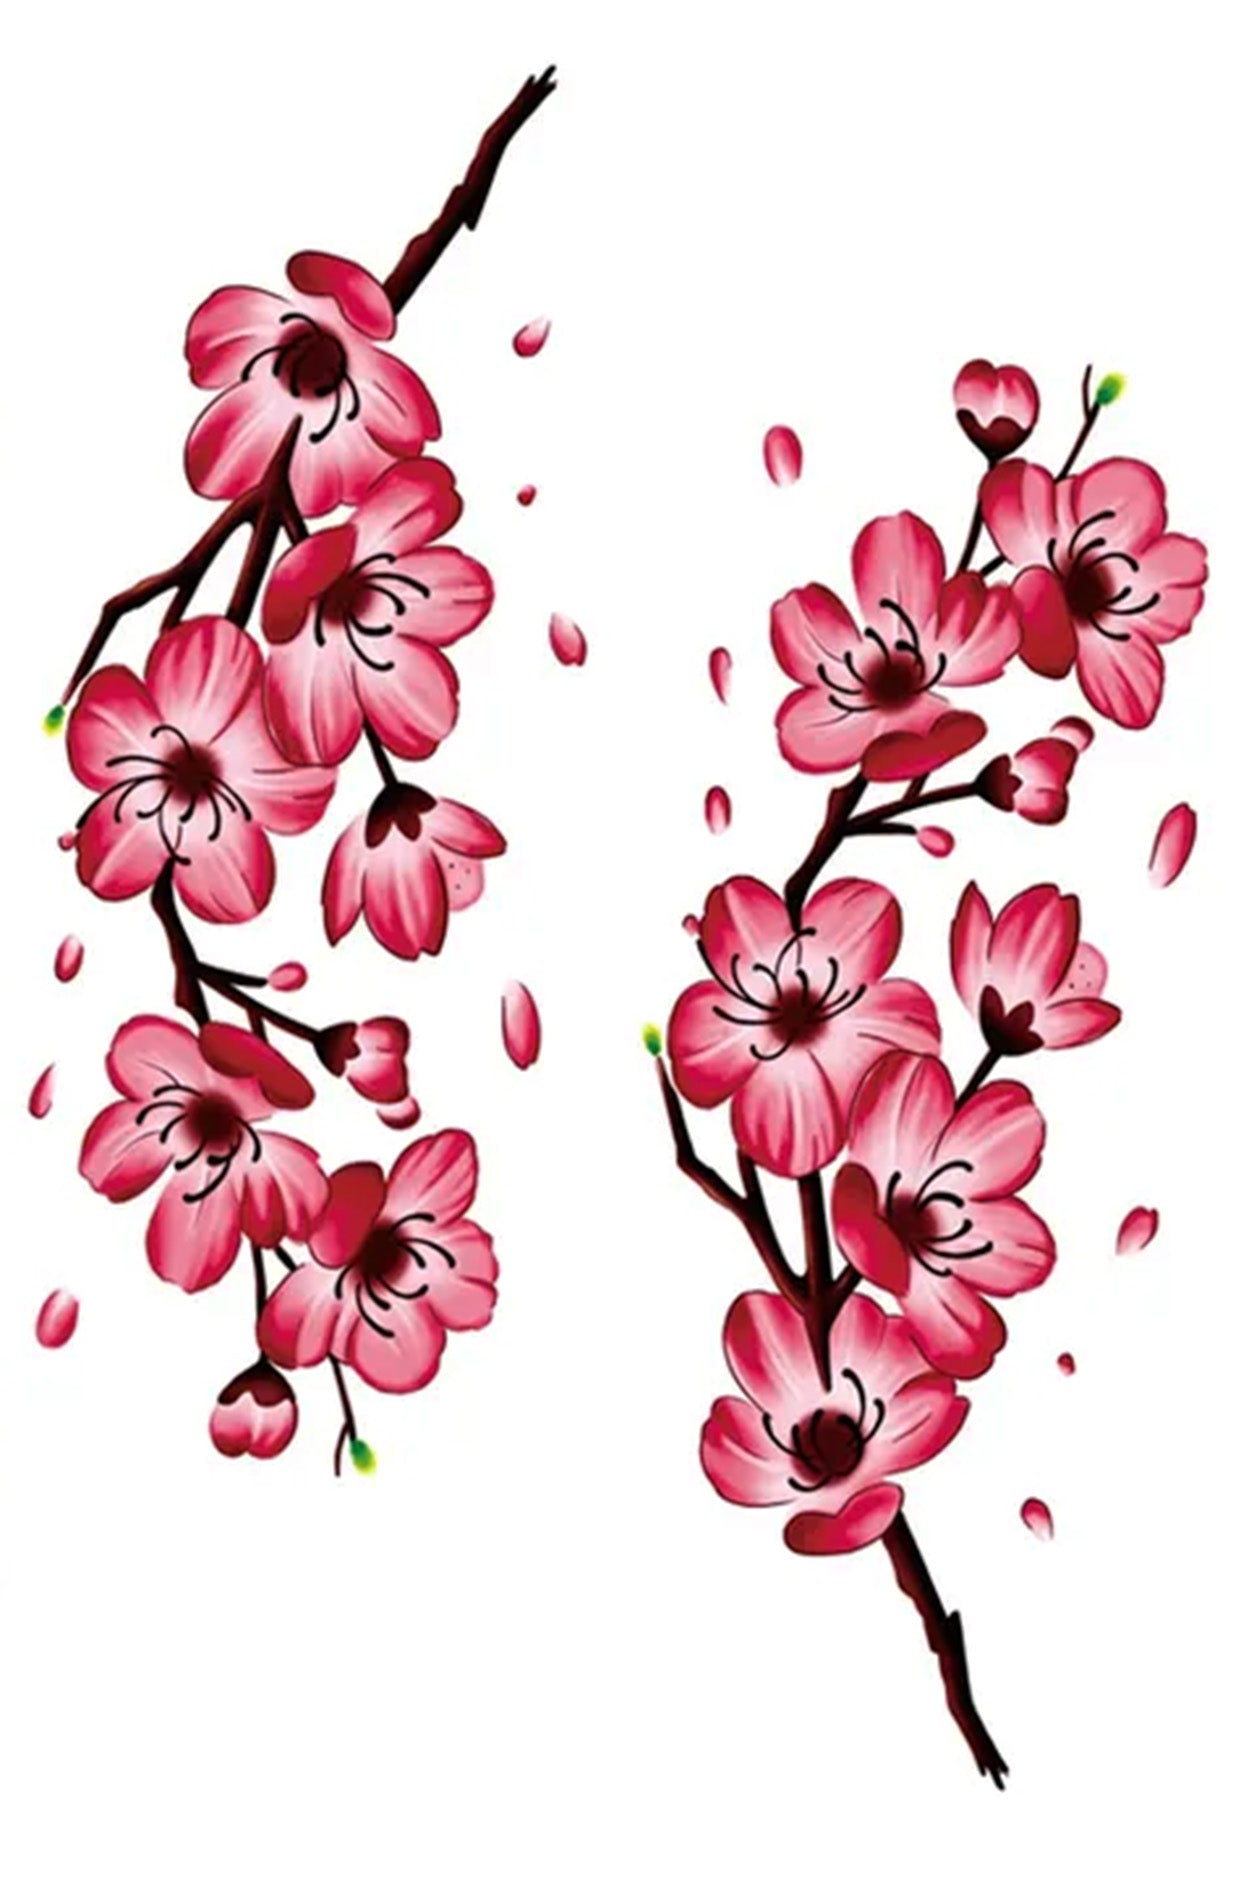 Two cherry blossom branches sustain an abundance of pink spring blooms. In old Buddhist stories, the cherry tree represents fertility and femininity.